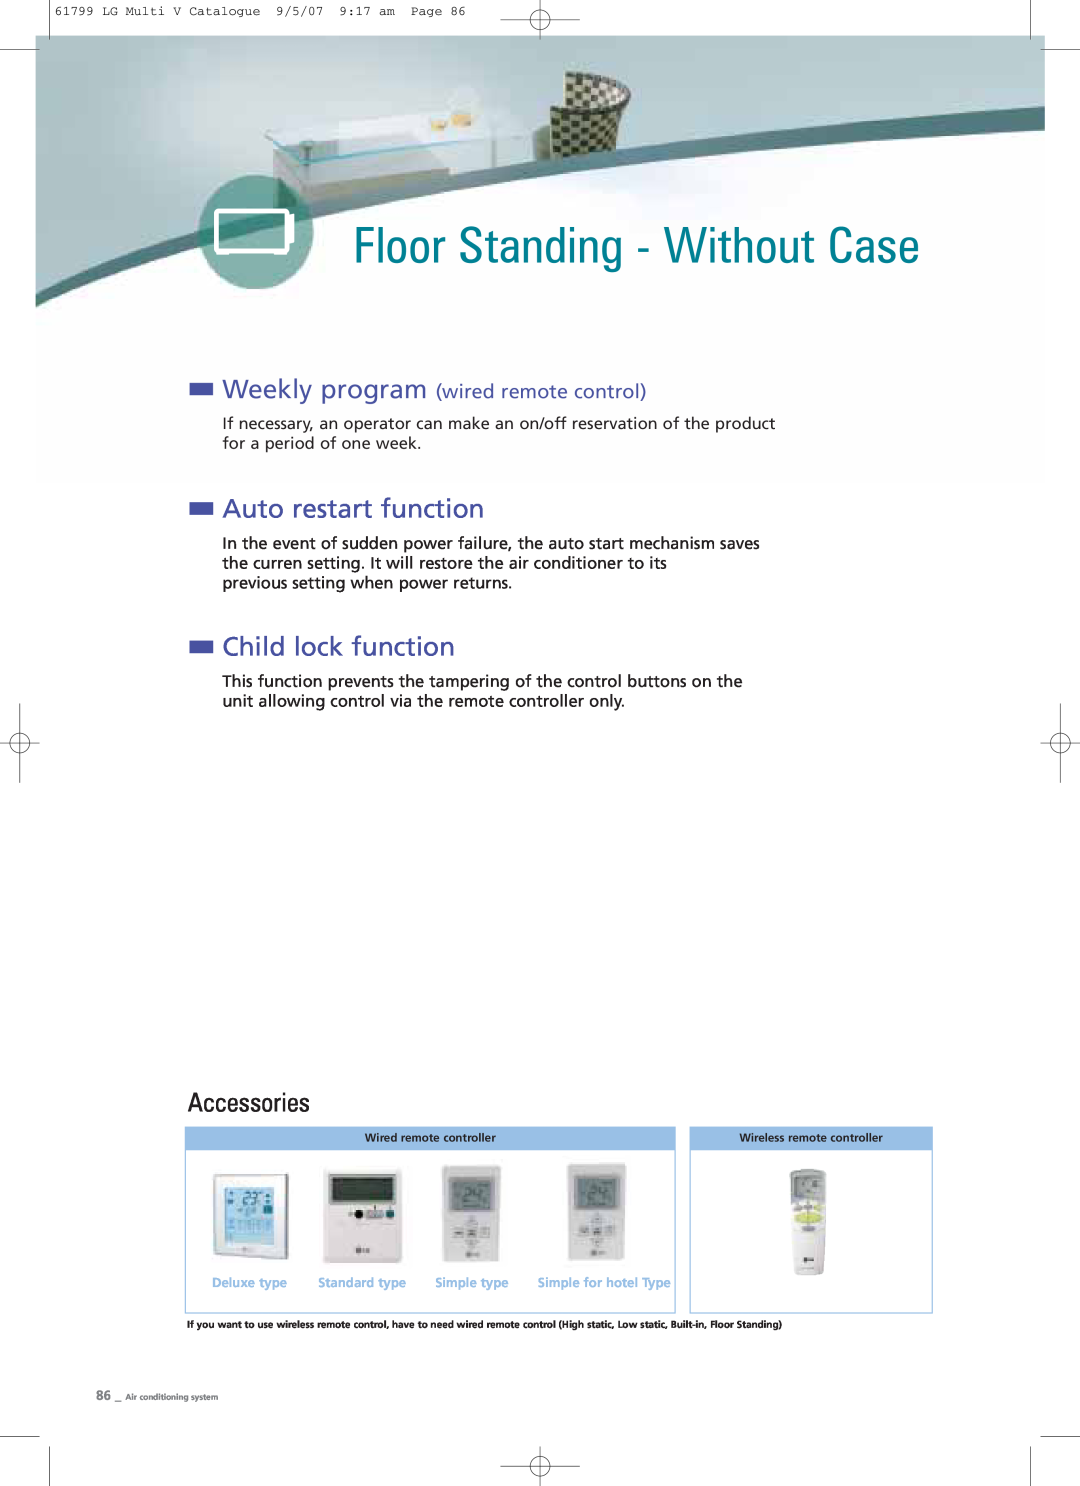 LG Electronics PRHR040 manual Floor Standing - Without Case, Auto restart function, Child lock function, Accessories 